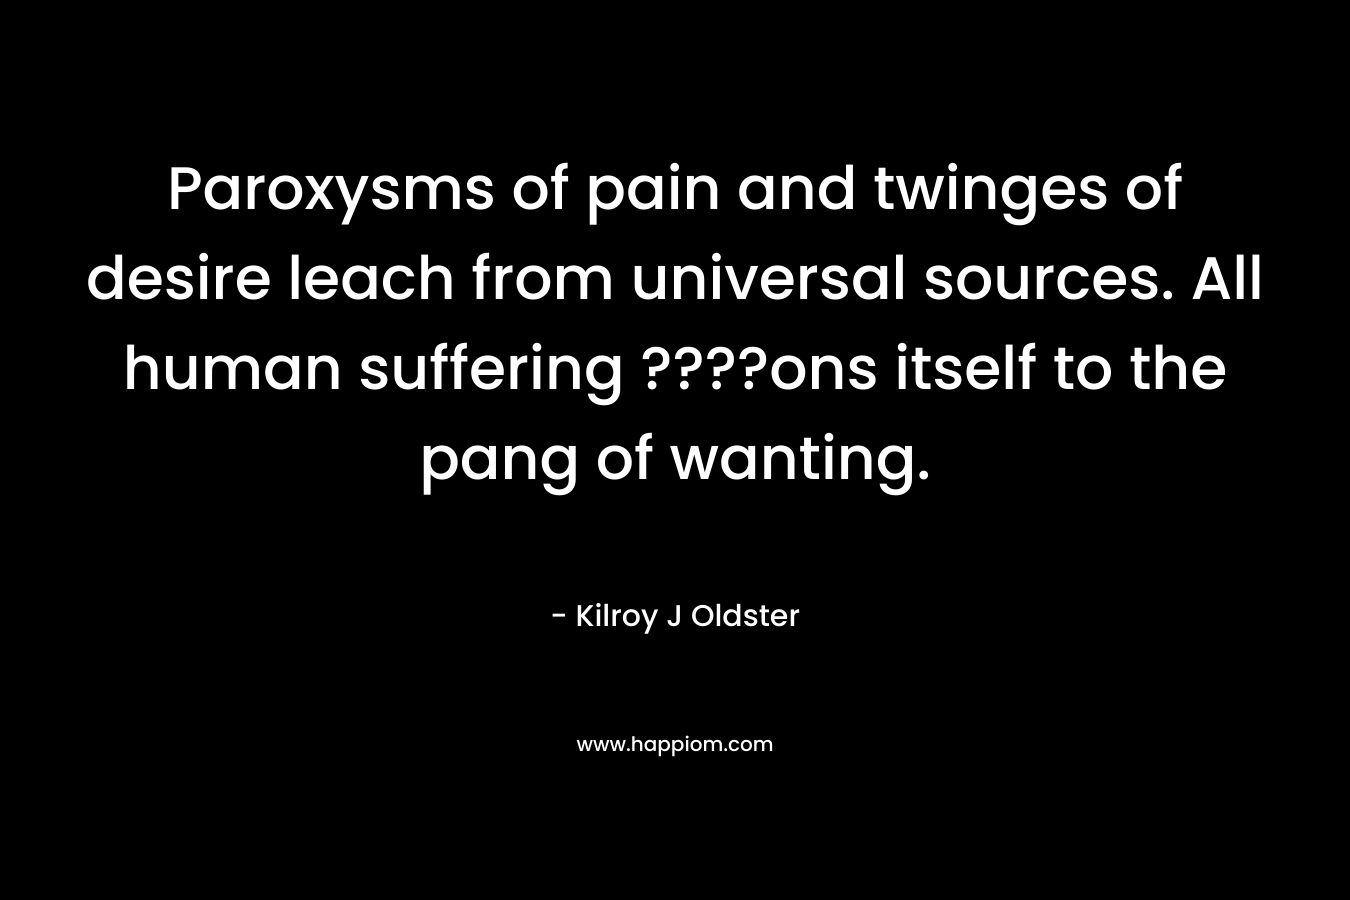 Paroxysms of pain and twinges of desire leach from universal sources. All human suffering ????ons itself to the pang of wanting.